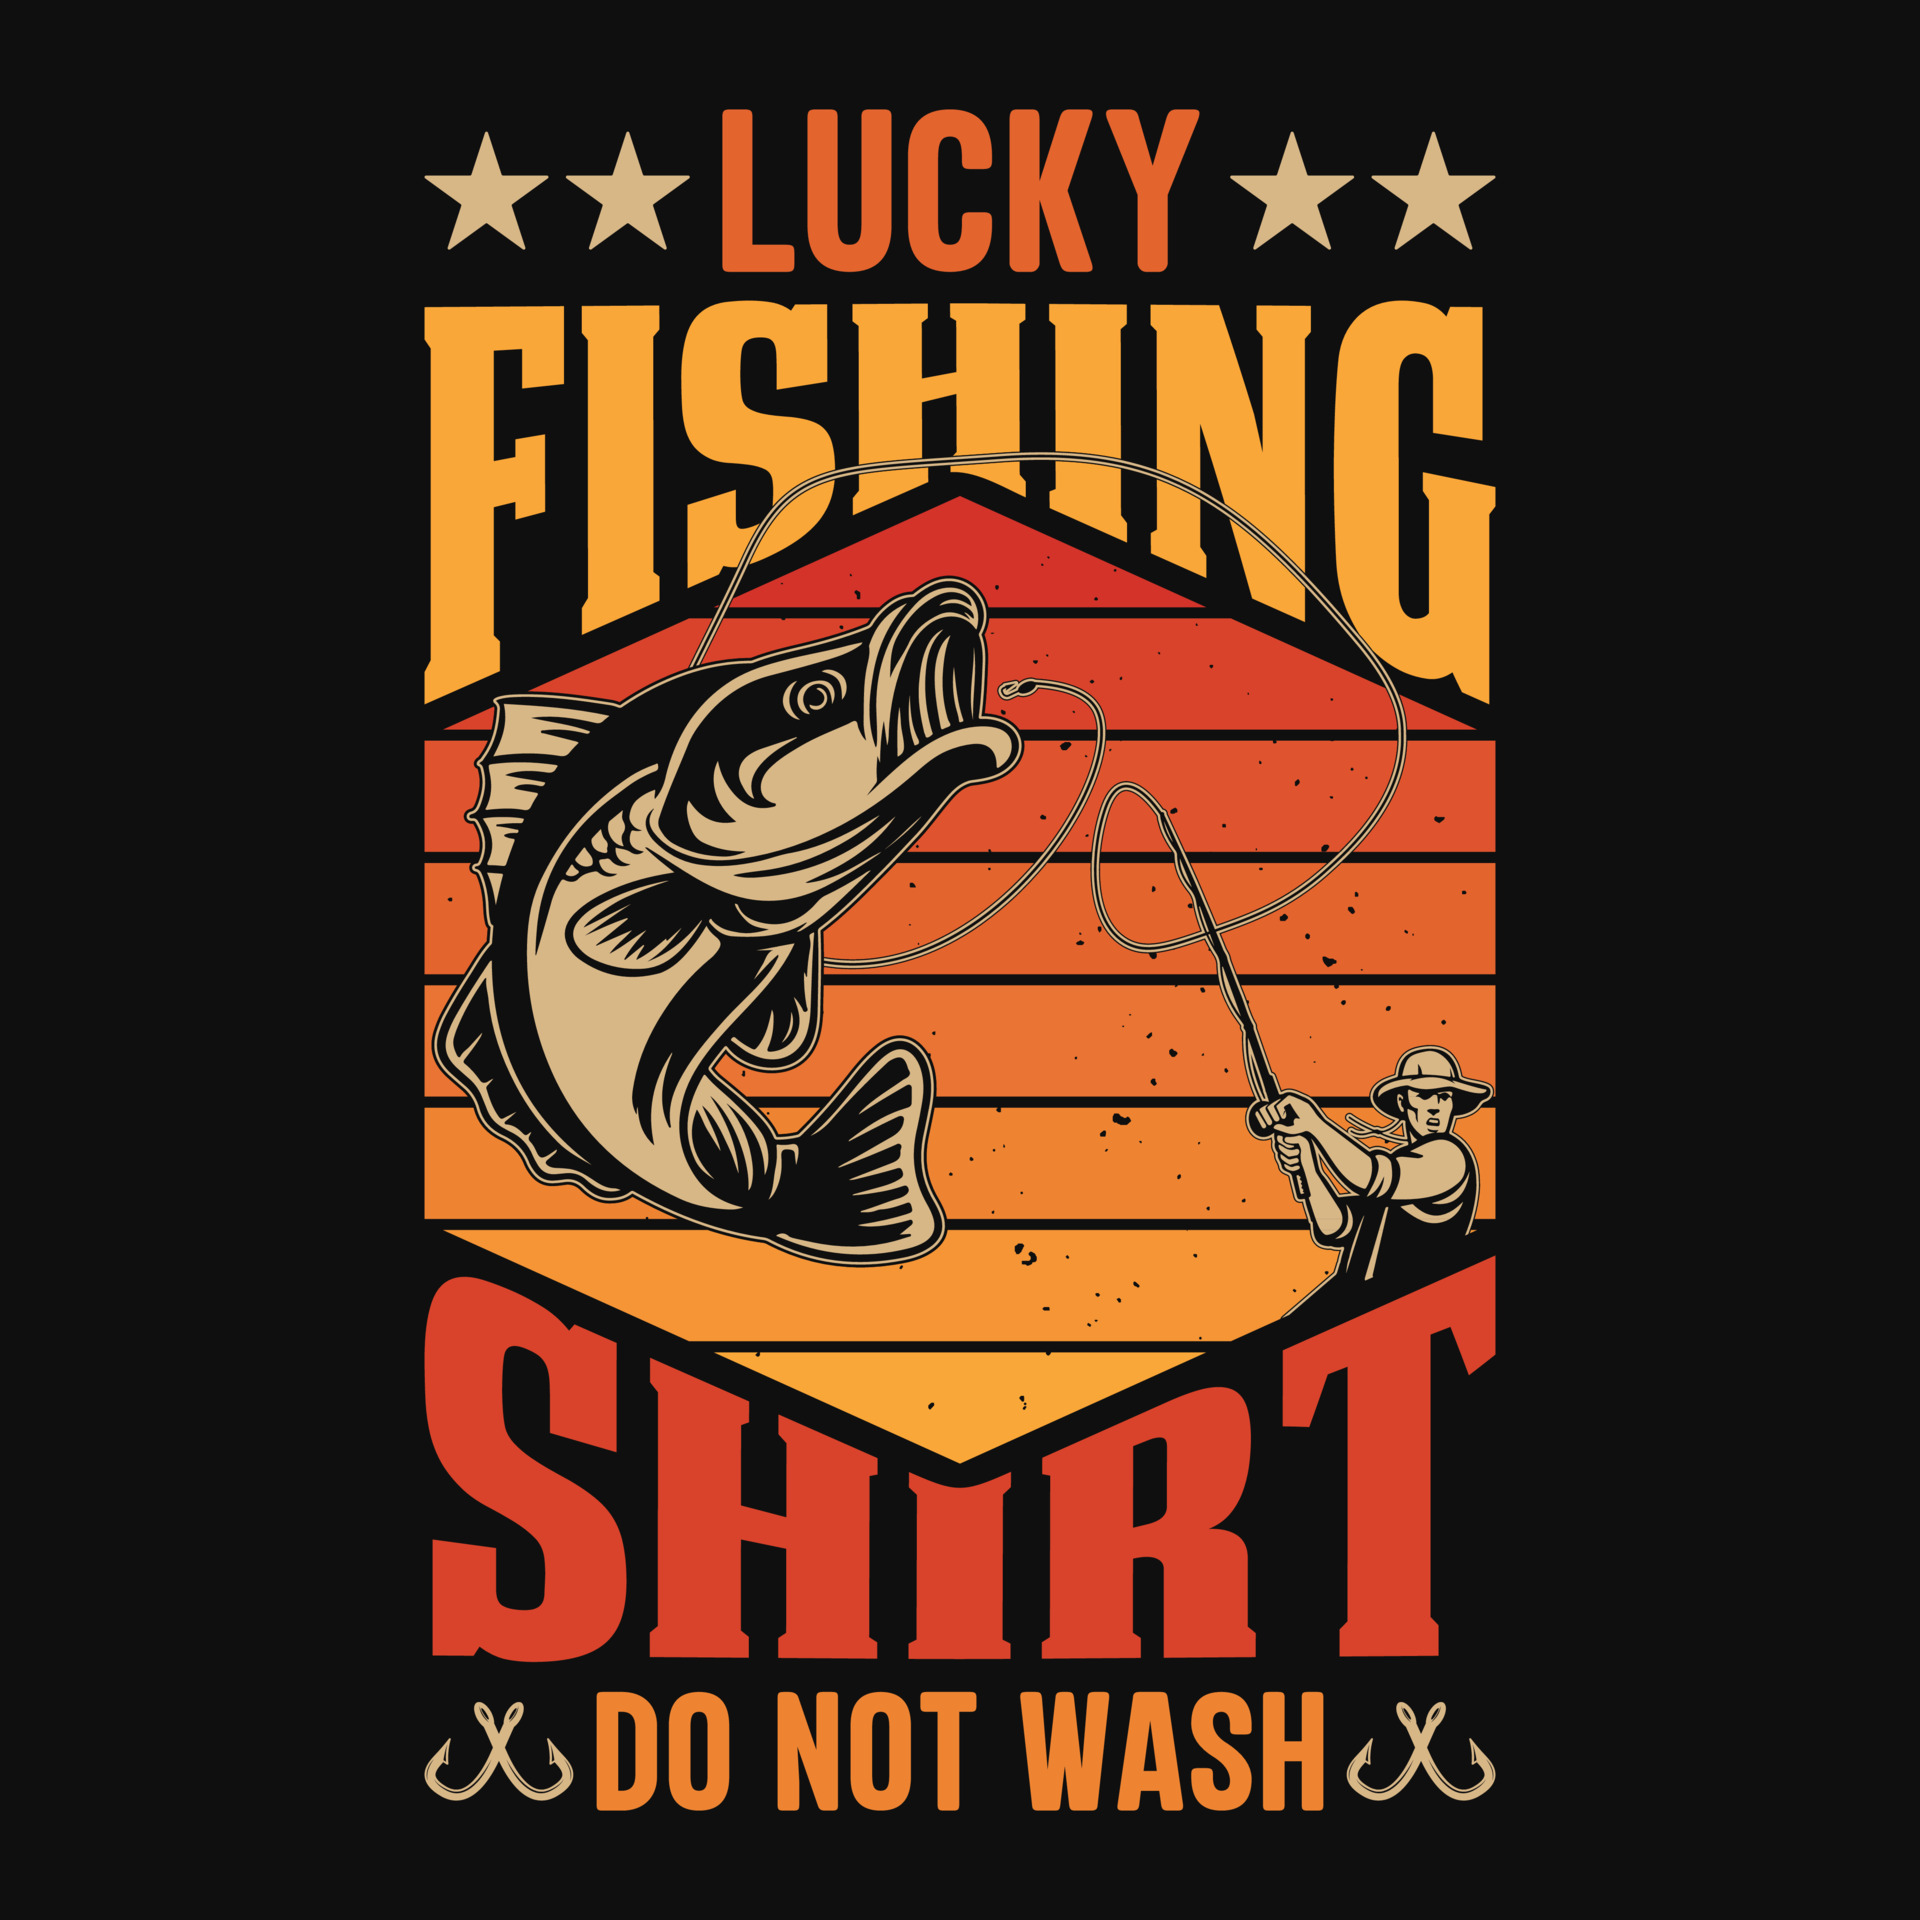 Lucky fishing shirt do not wash - Fishing quotes vector design, t